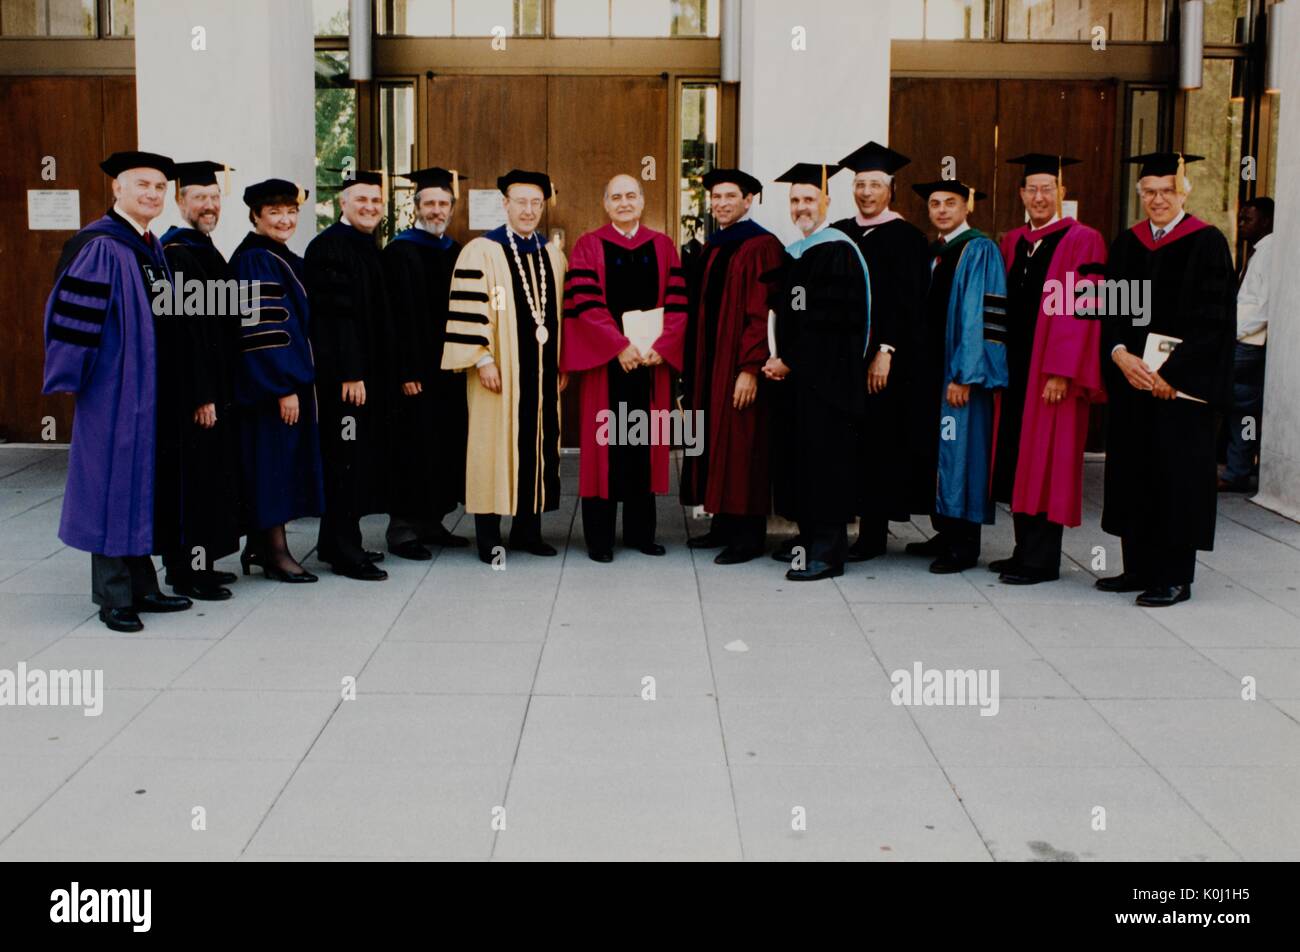 President Richardsons final commencement in 1995, from left to right: Dean Stanley Gabor (continuing studies), APL Director Gray Smith, Dean Sue Donaldson (Nursing), Dean Steven Knapp (Arts and Sciences), Dean Don Giddens (Engineering), President William Richardson, Provost Joseph Cooper, Dean Paul Wolfowitz (SAIS), Dean Larry Benedict (Homewood Stuent Affairs), Director Robert Pierce (Peabody Institute), Dean Michael Johns (Medicine), Dean Alfred Sommer (Public Health), Director Les Salomon (Institute for Policy Studies). May 27, 1995. Stock Photo